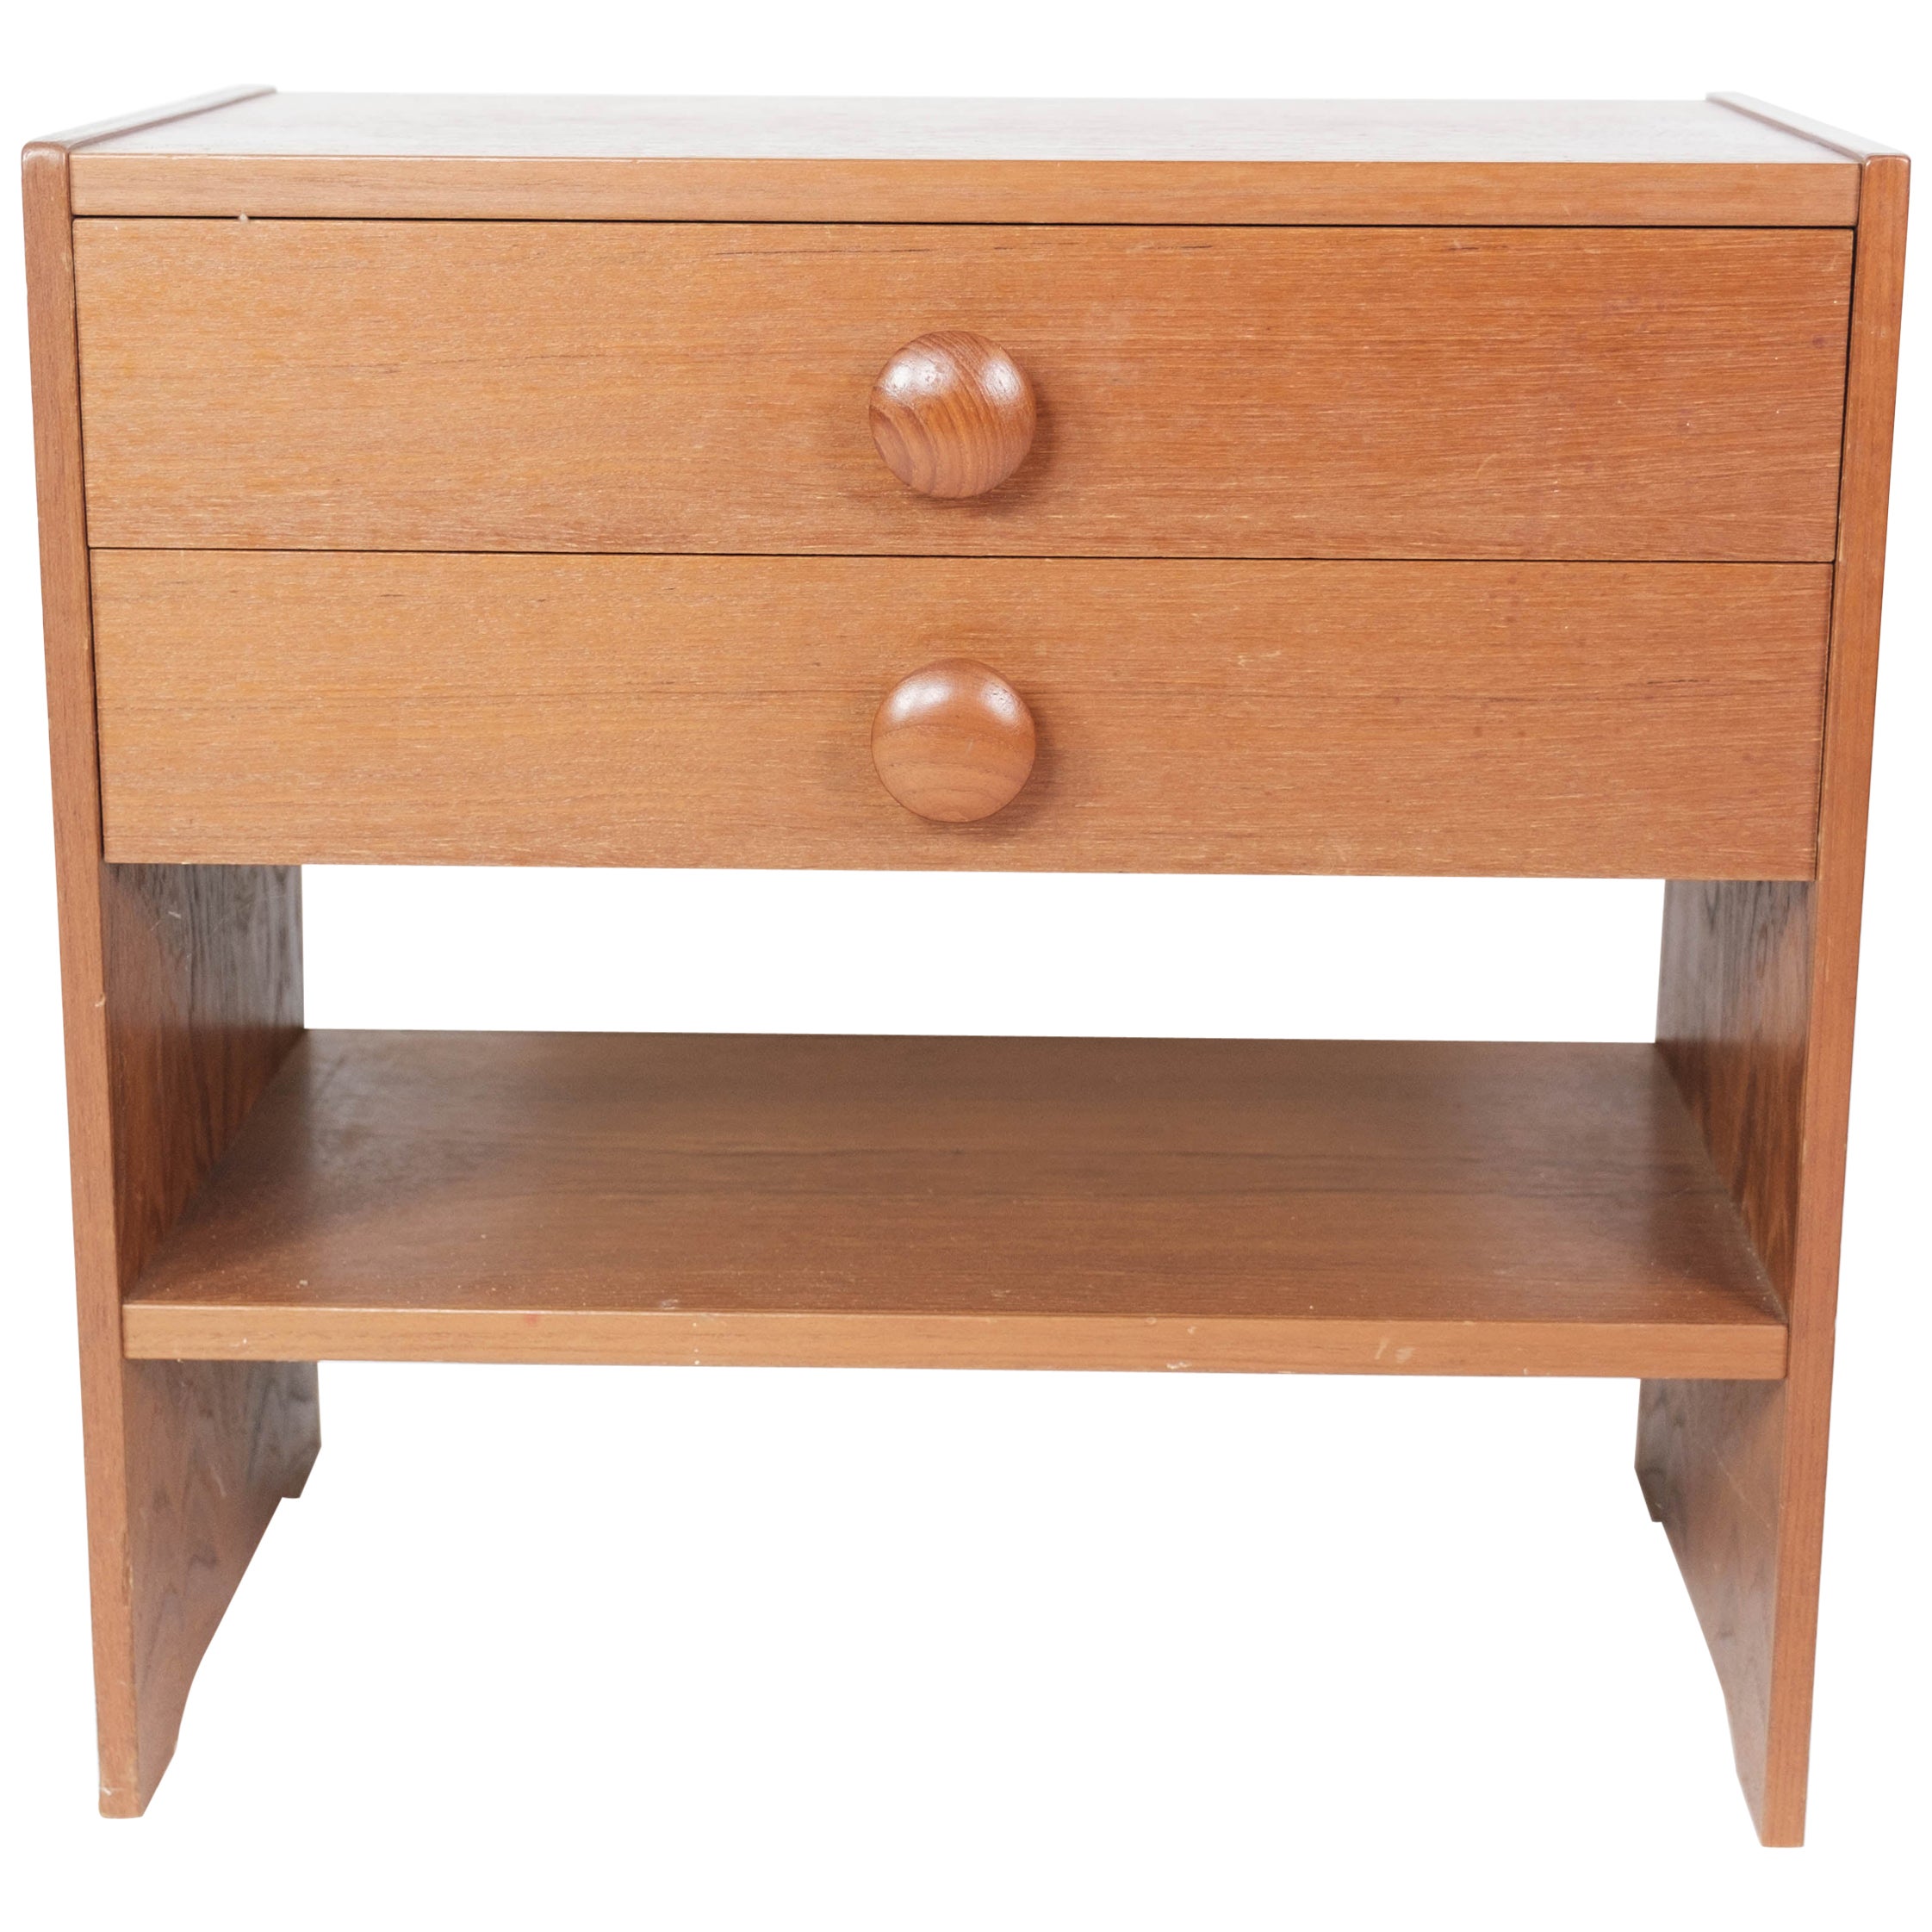 Bedside Table with Drawers in Teak of Danish Design by Pbj Furniture